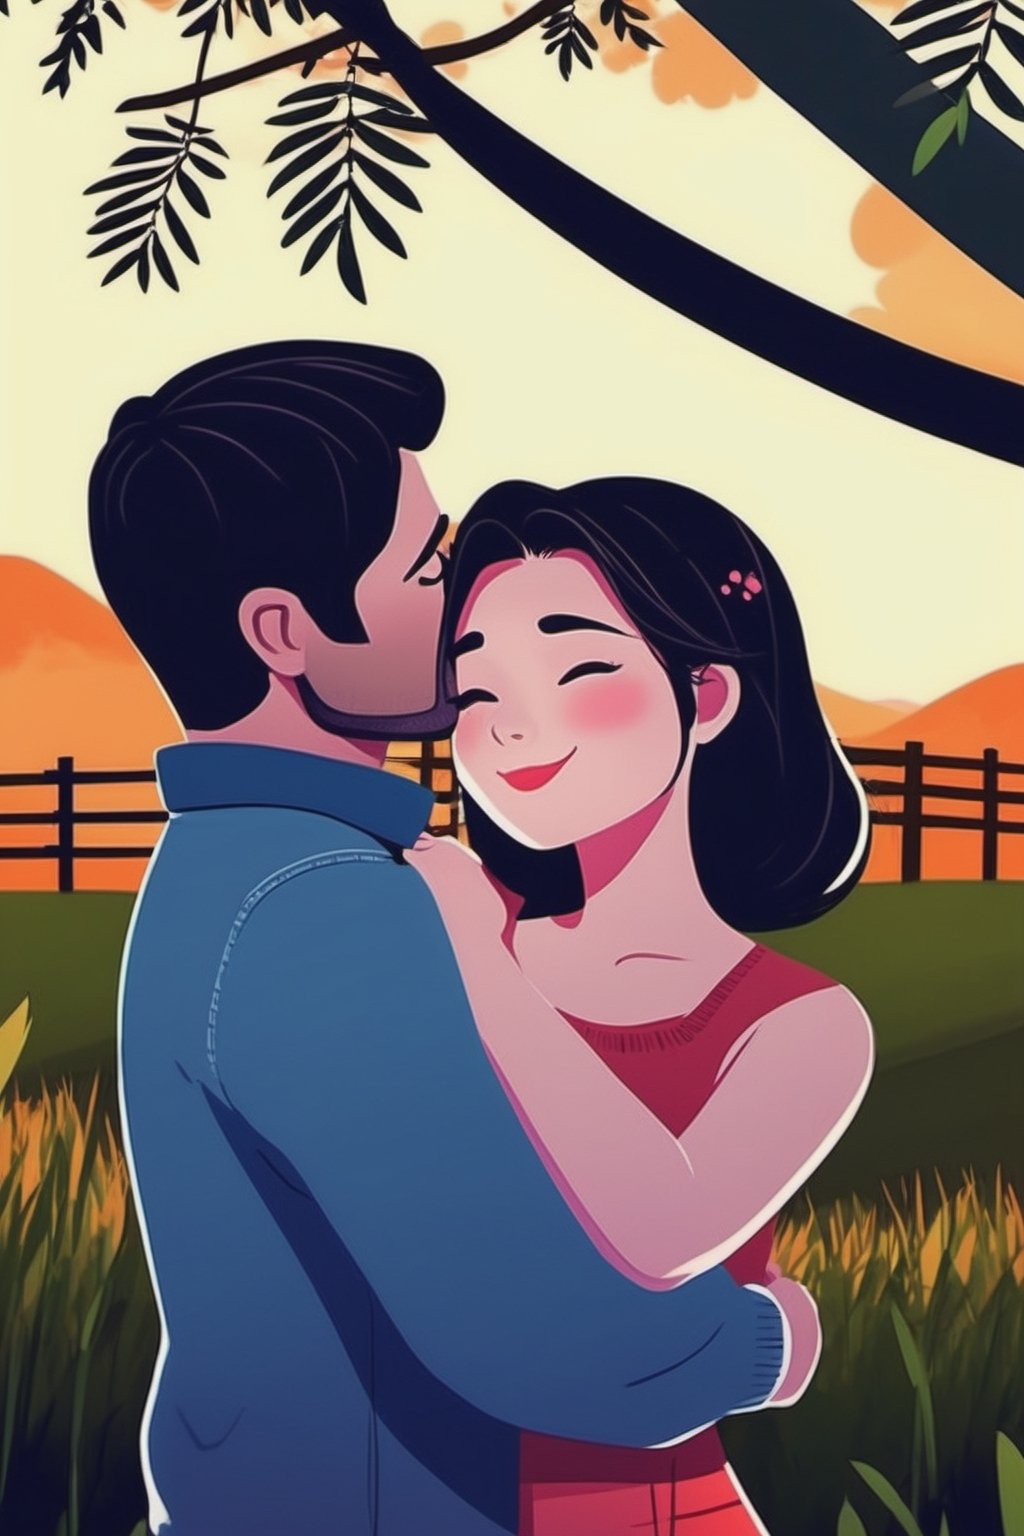 Touching scene, couple in love (farm) Emotional expression, ((a man handsome, very attractive, dark-haired, rude, 38-year-old man)) ((a woman beautiful, very beauty, dark-haired, long-haired, slender, 30-year-old woman)), Illustration, High Resolution, Lighting, Passionate, Cute Facial Features, Emotional Scene, Couple Kissing, Affectionate Expression, (Casual, Country Wear), Mixed Media Tools, Mixed Media, High Resolution, Warm Lighting, Affectionate Intimate Facial Features, Beautiful Landscape Background